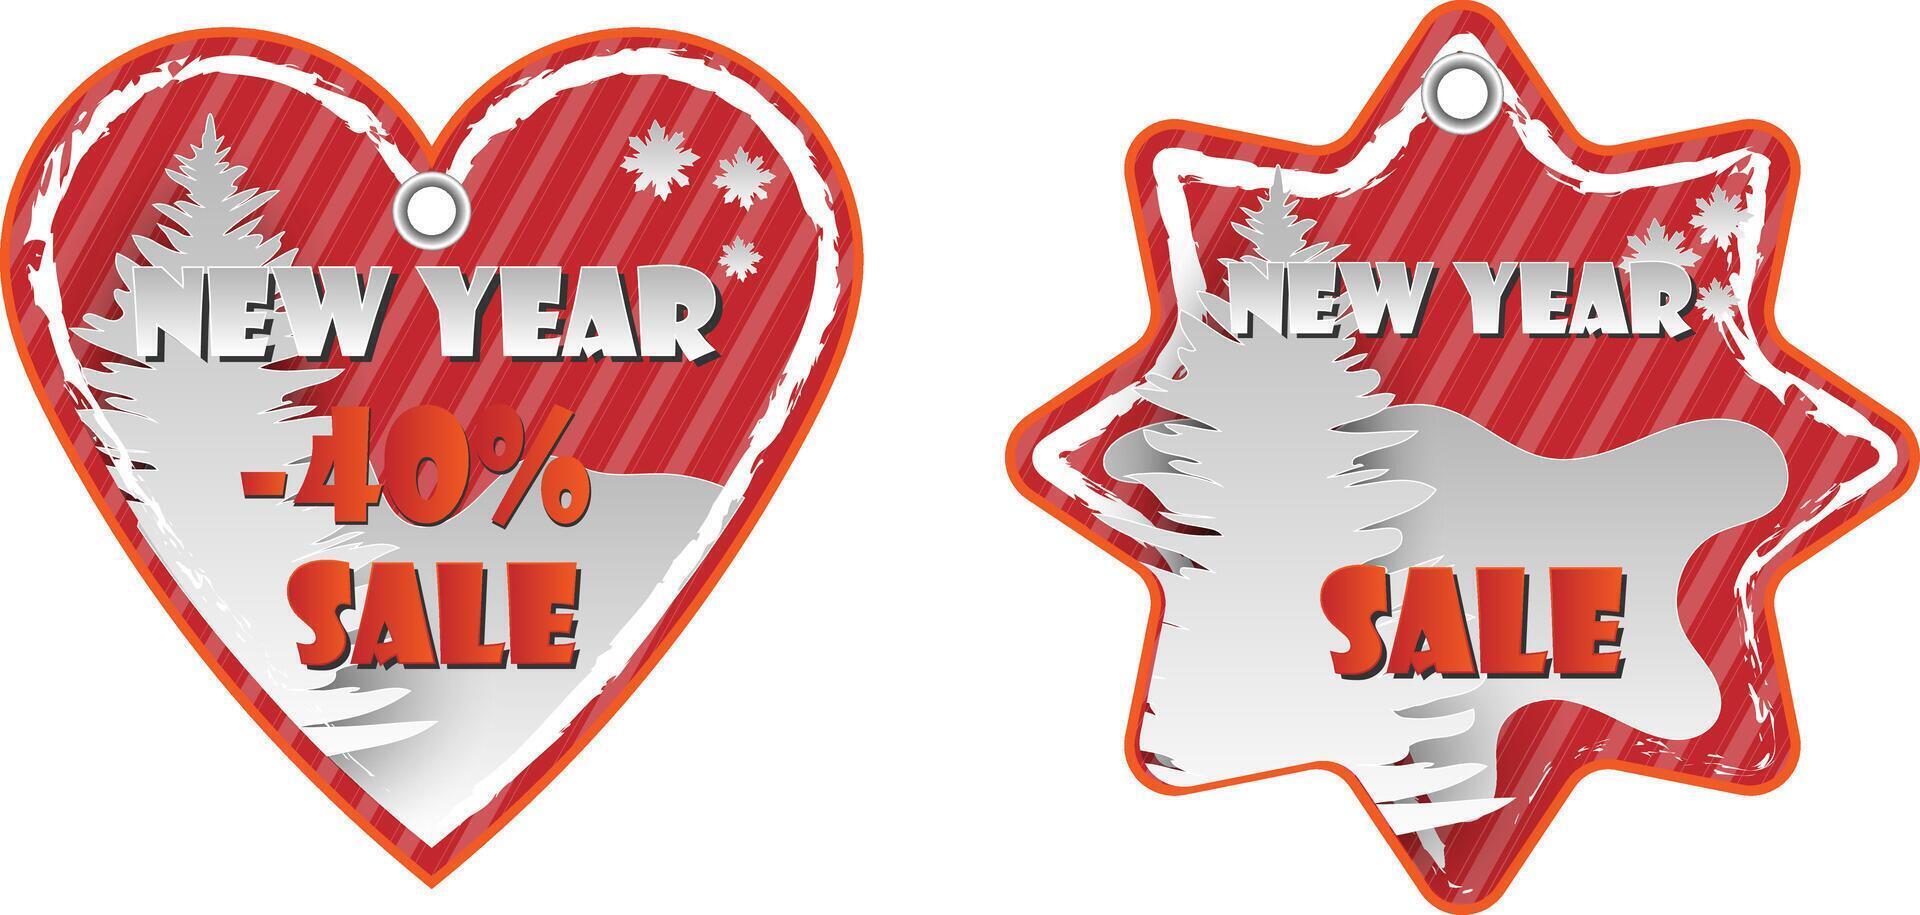 Heart and star shape Red New Year, christmas sale paper tags set with paper cut elements with discount text for christmas holiday shopping promotion. Vector illustration.